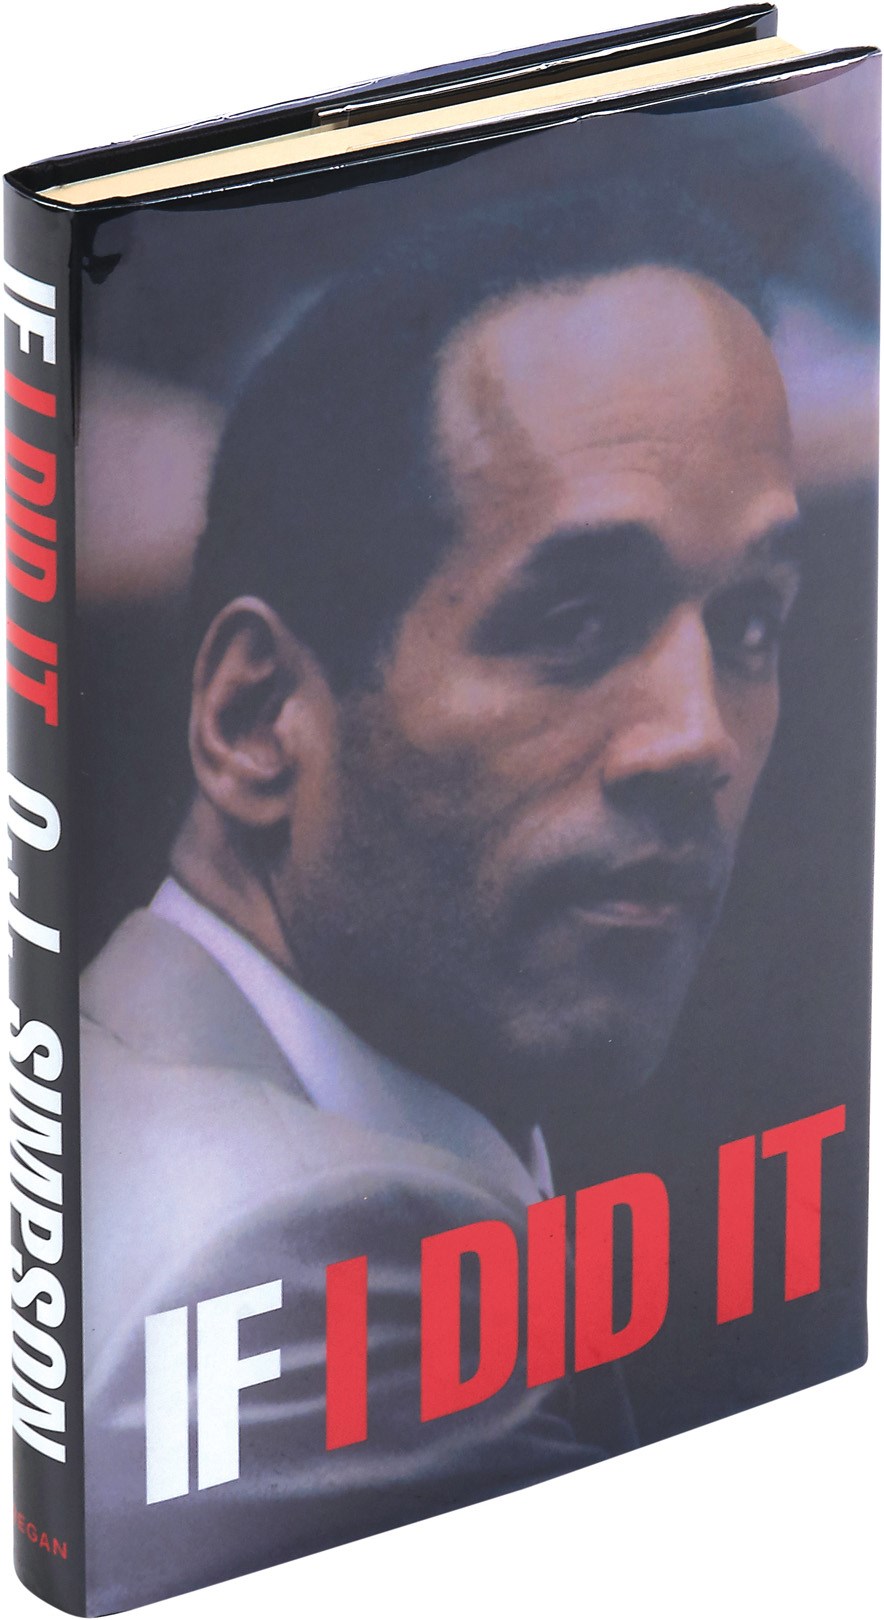 - 2006 "If I Did It" First Edition by OJ Simpson